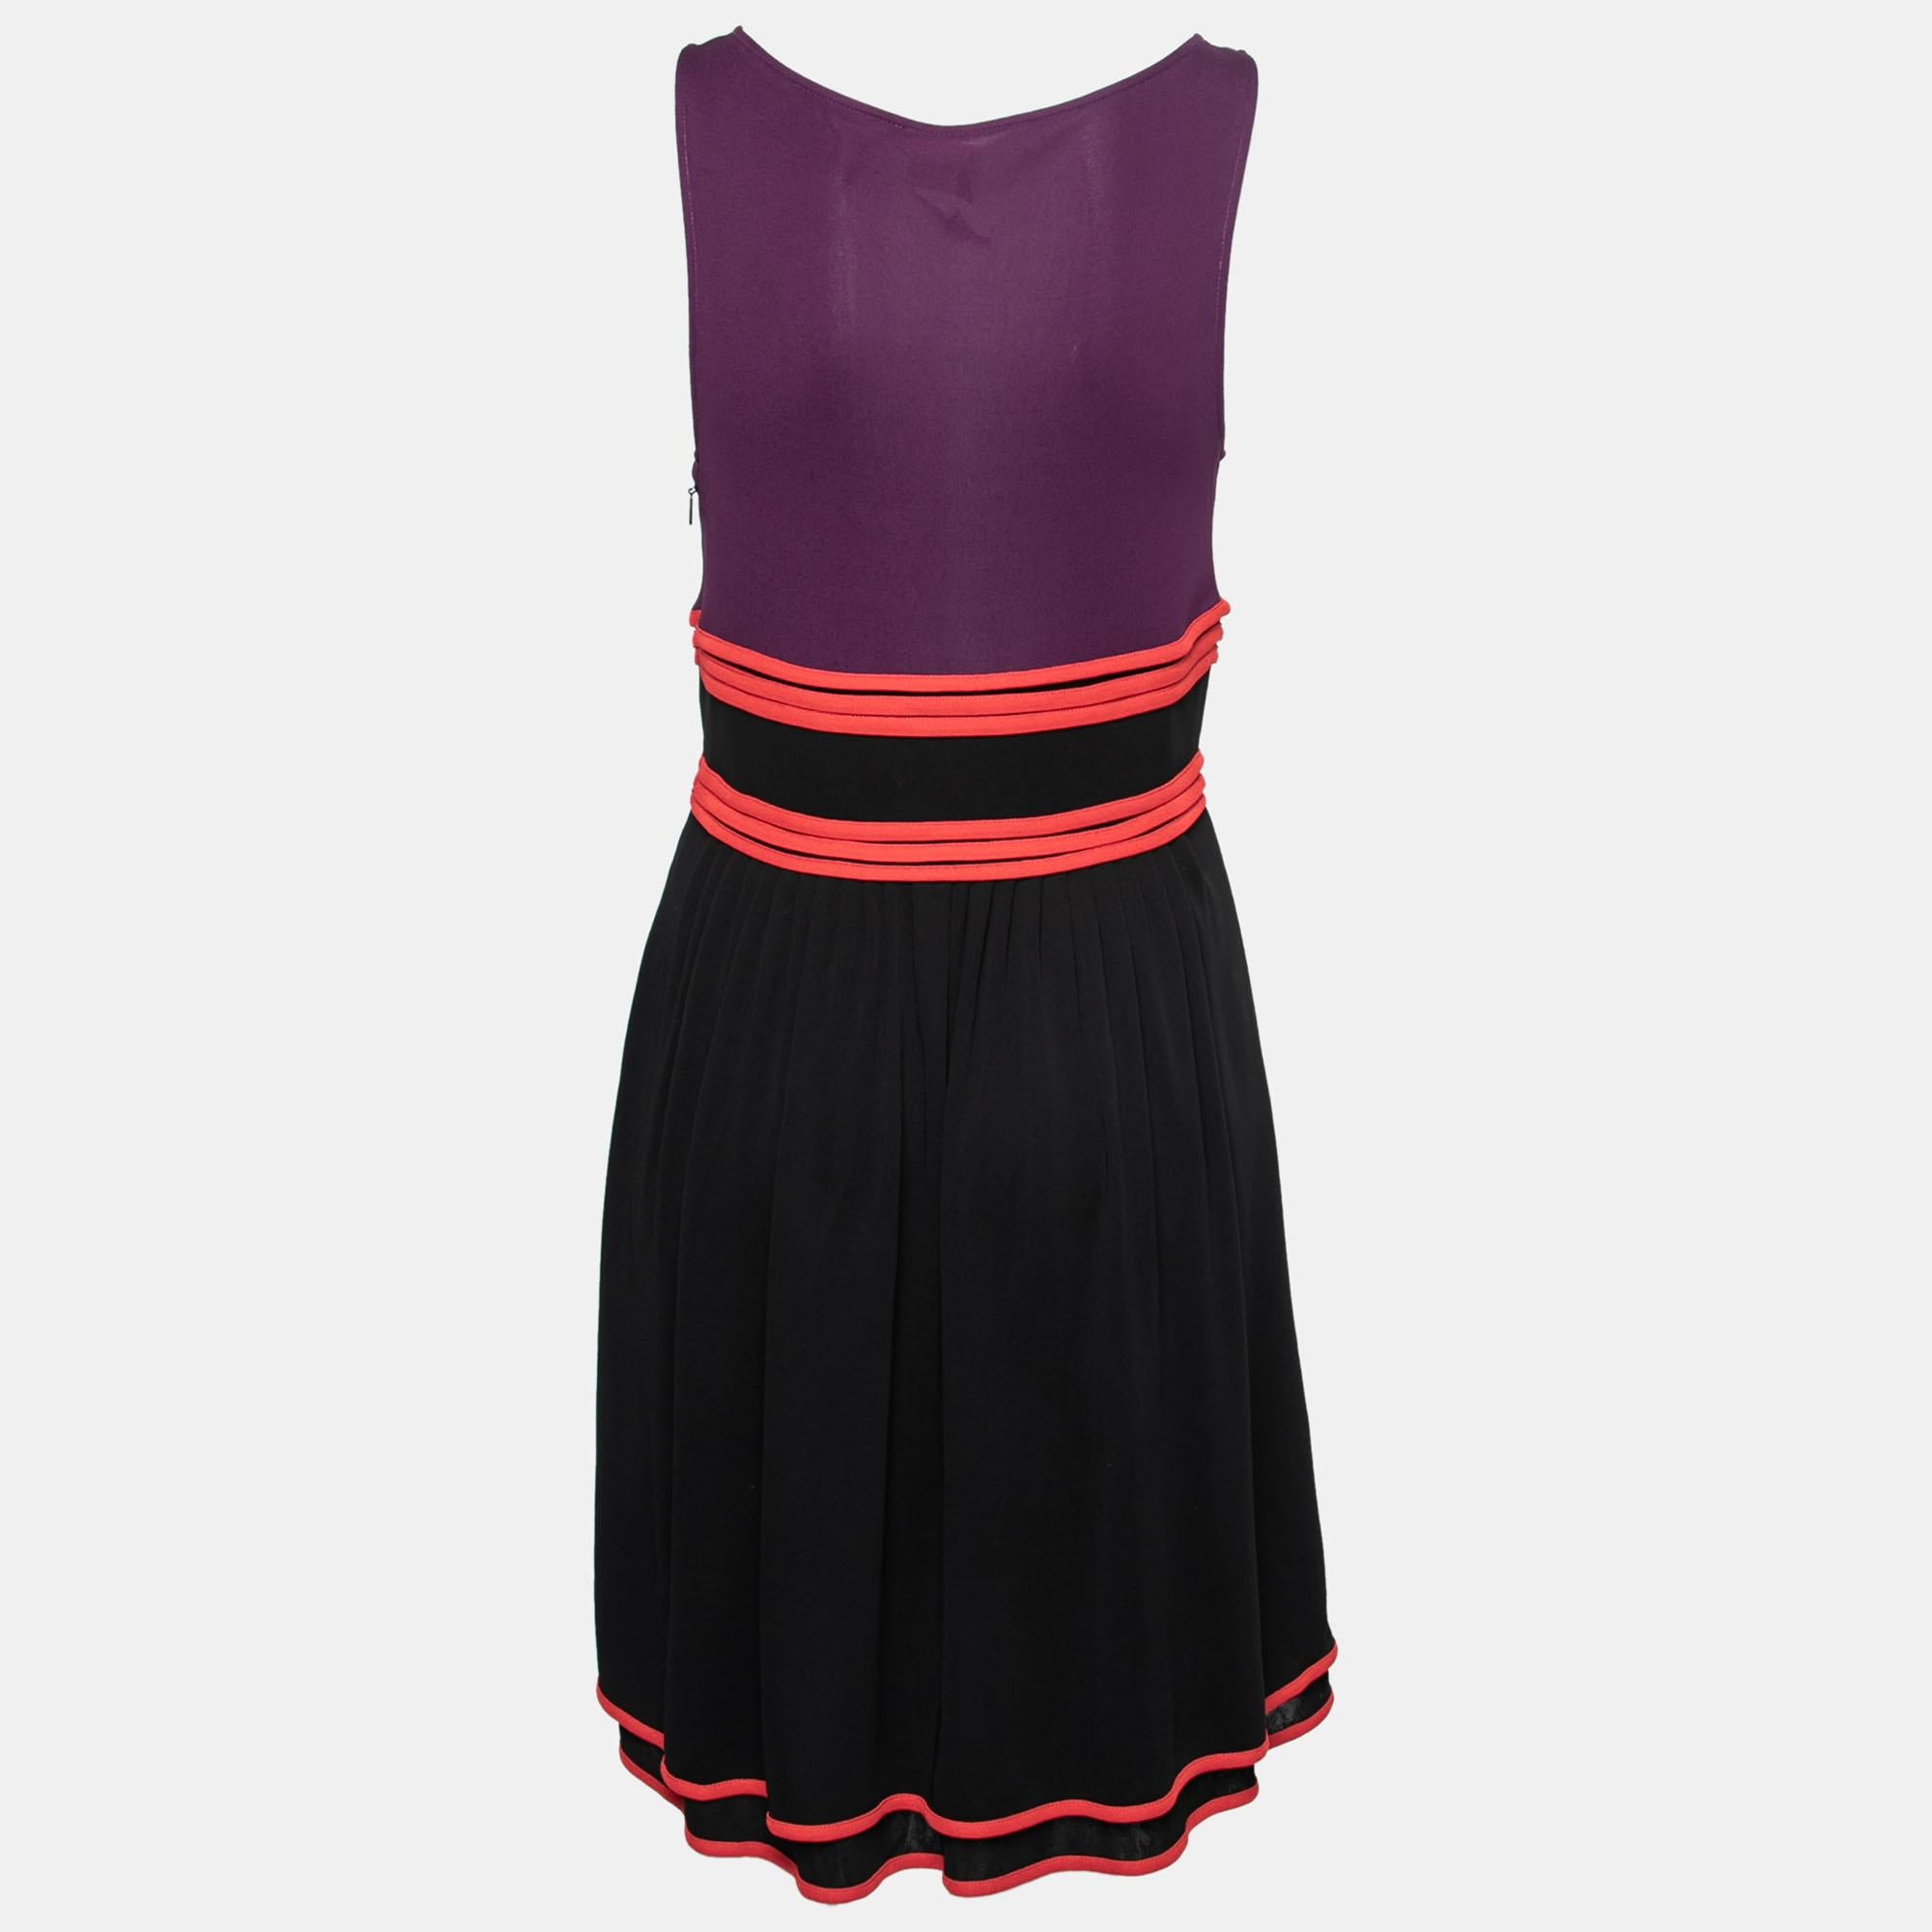 This dress from the House of Gucci proves to be the best pick for casual use. Crafted using black-purple knit fabric, this dress is highlighted with a plunging neckline and a sleeveless style. Match it with comfy flat sandals and a sling bag to head